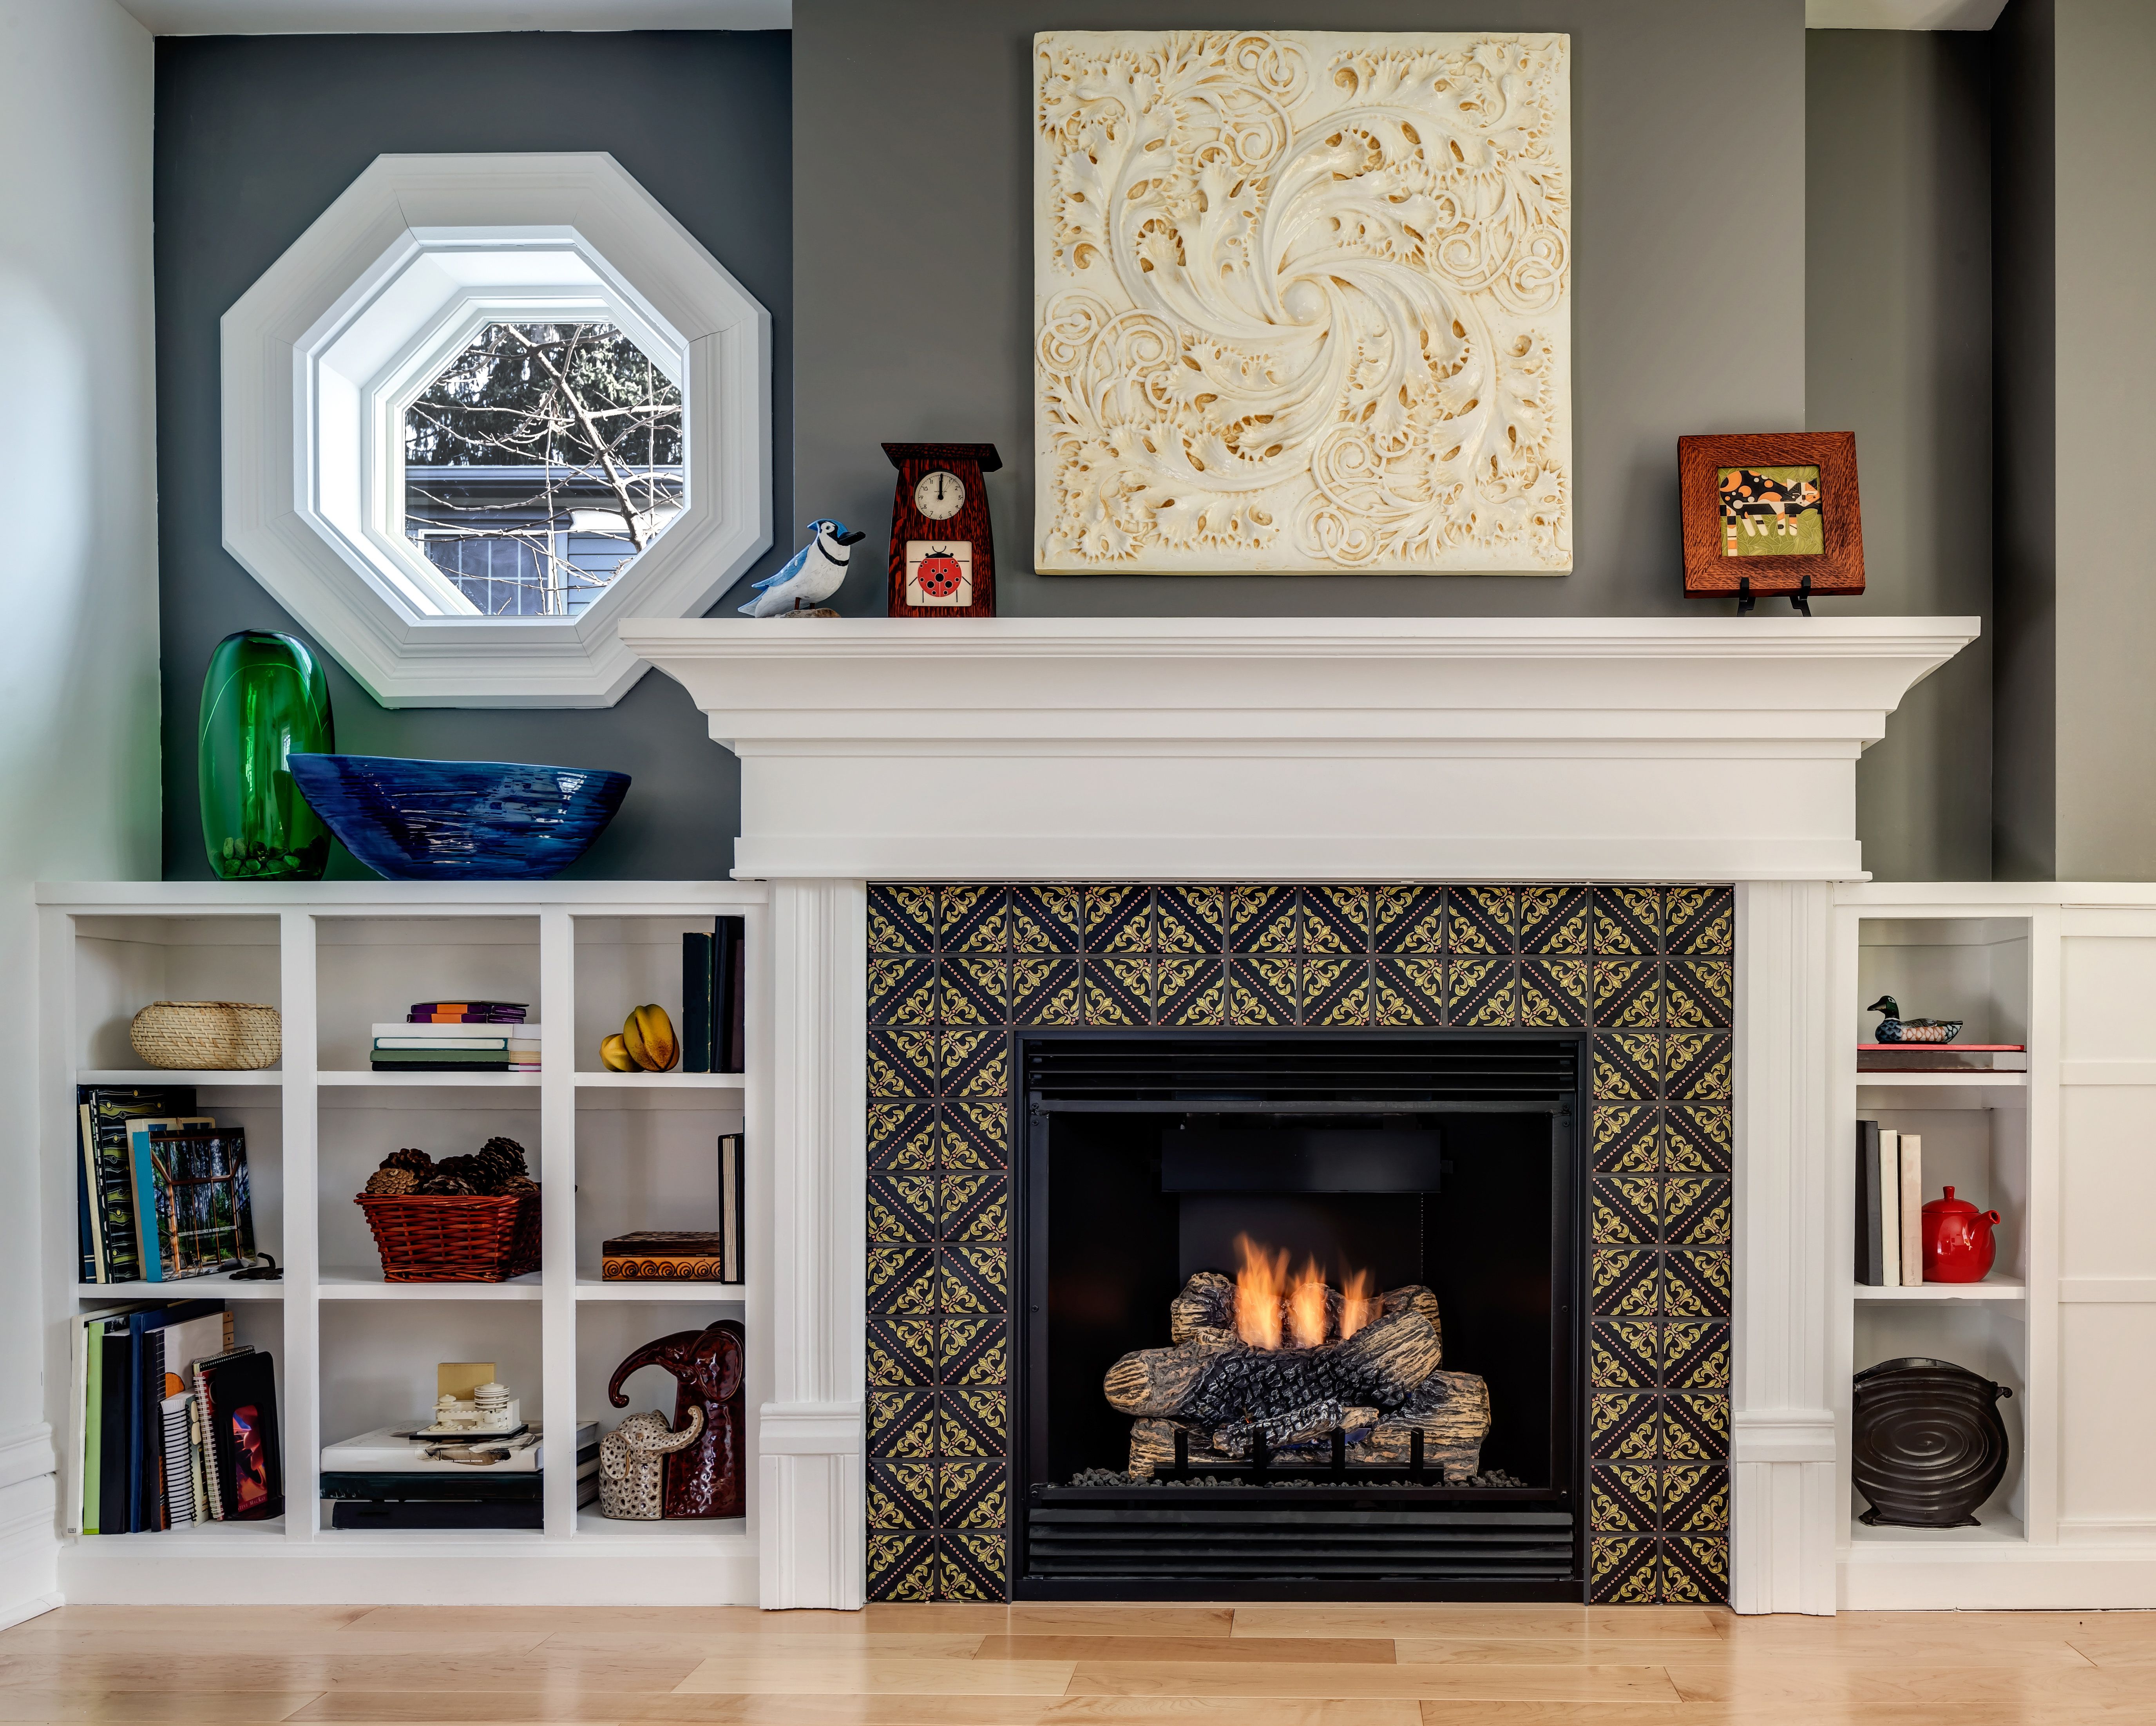 Small Fireplace Beautiful This Small but Stylish Fireplace Features Our Lisbon Tile